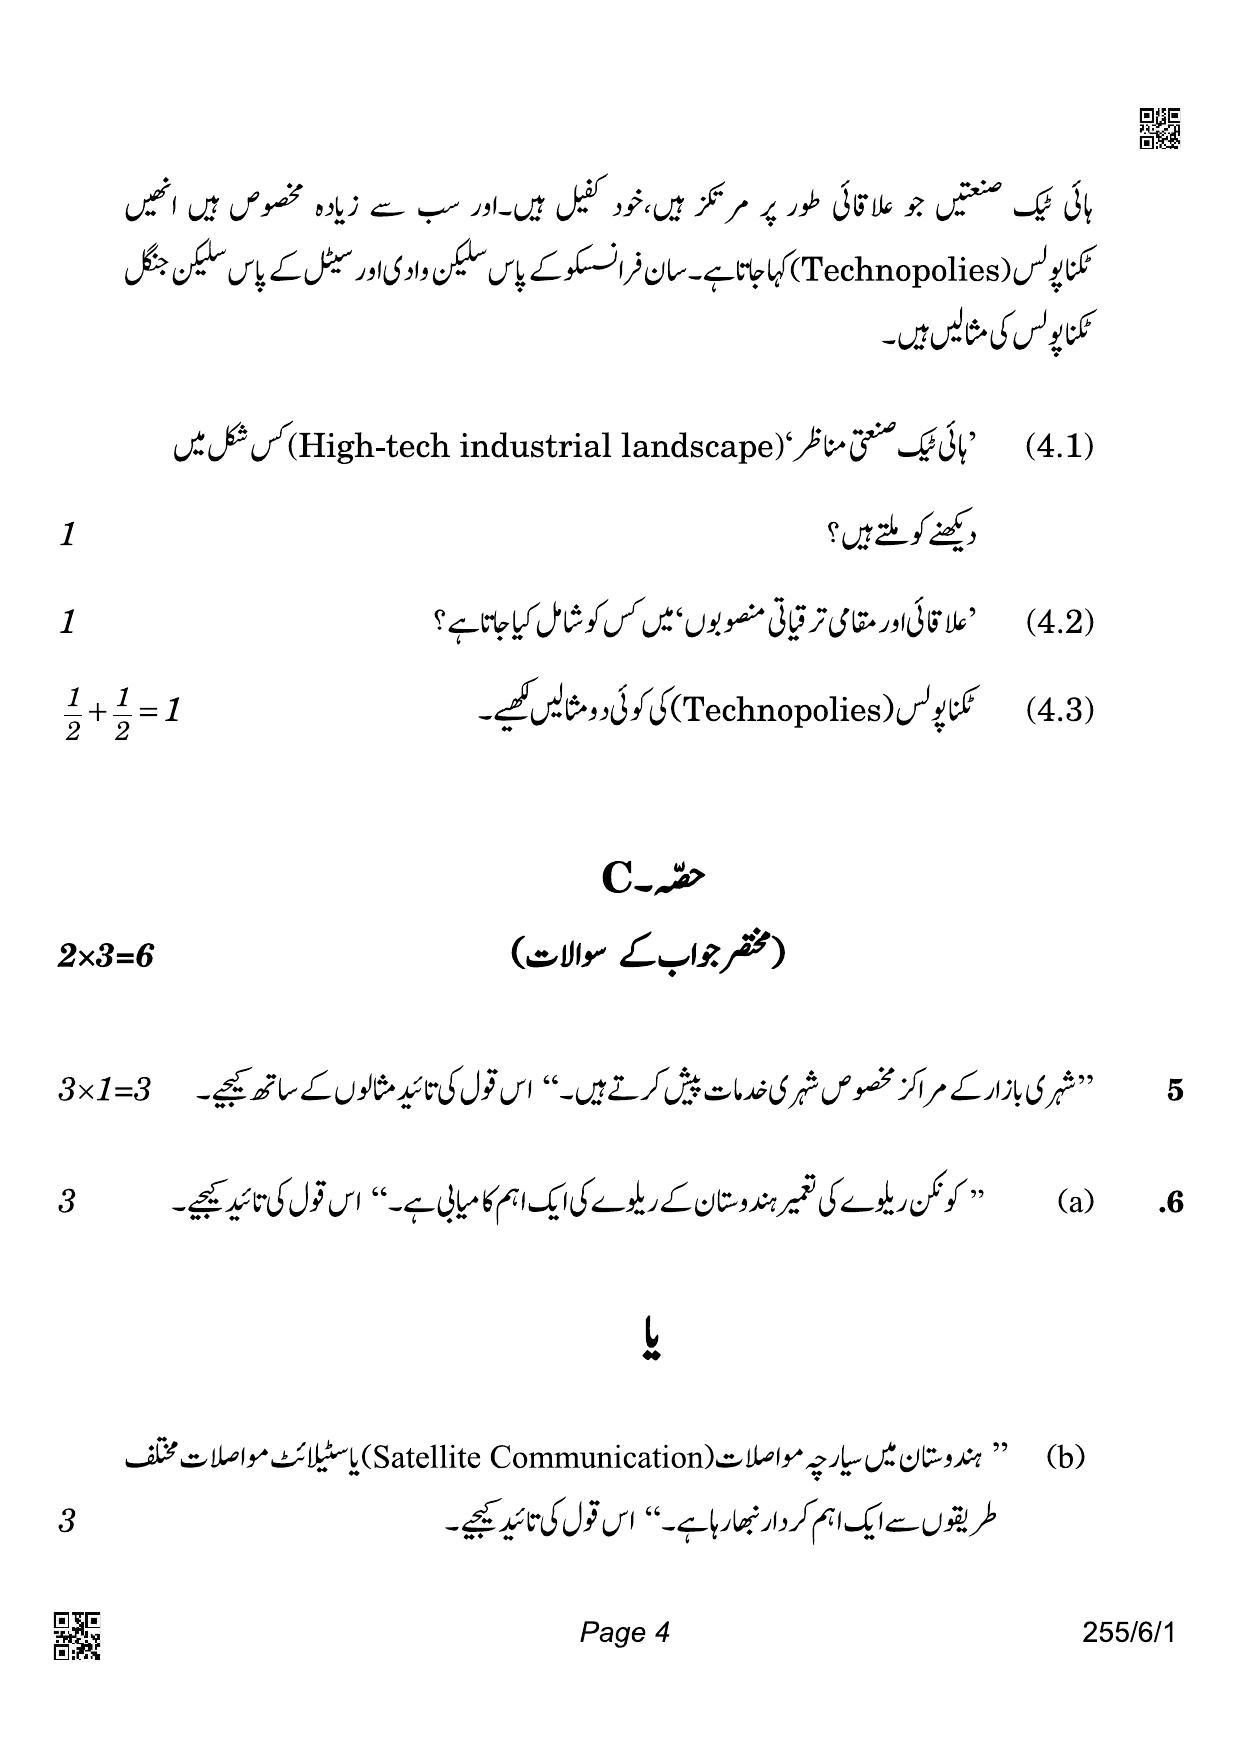 CBSE Class 12 255-6-1 Geography Urdu 2022 Compartment Question Paper - Page 4